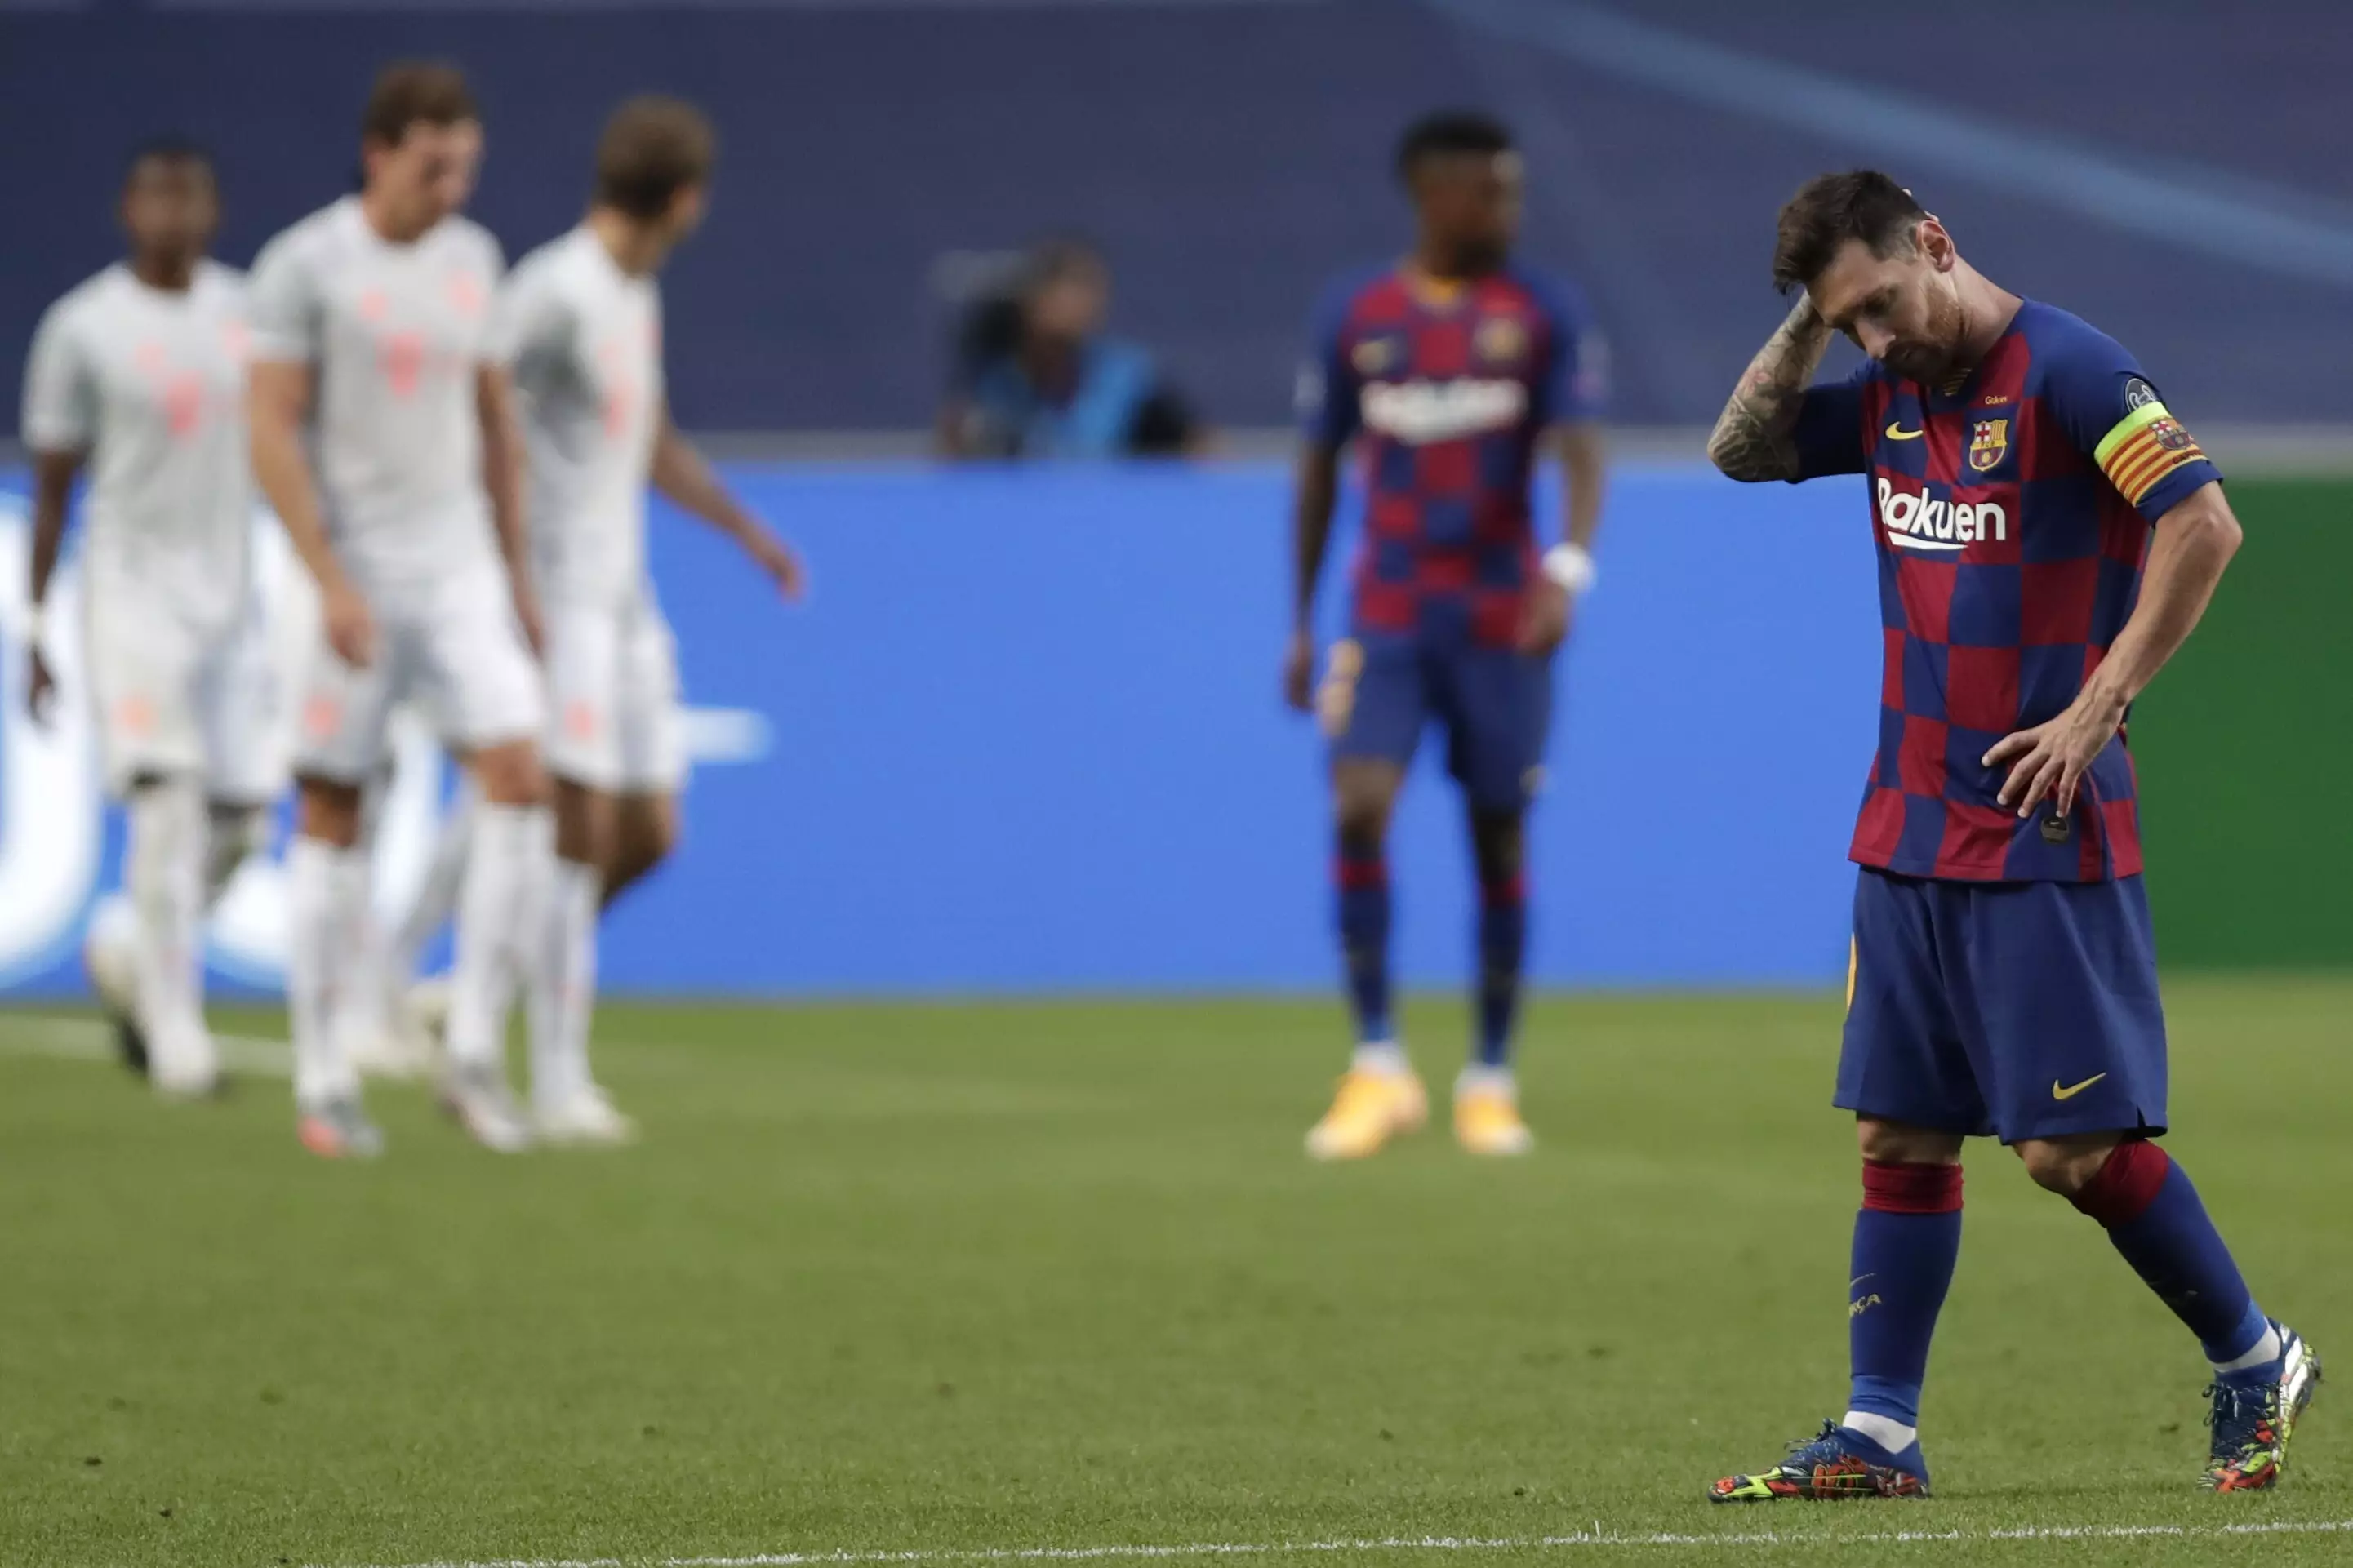 Messi sums up the feeling at Barcelona. Image: PA Images